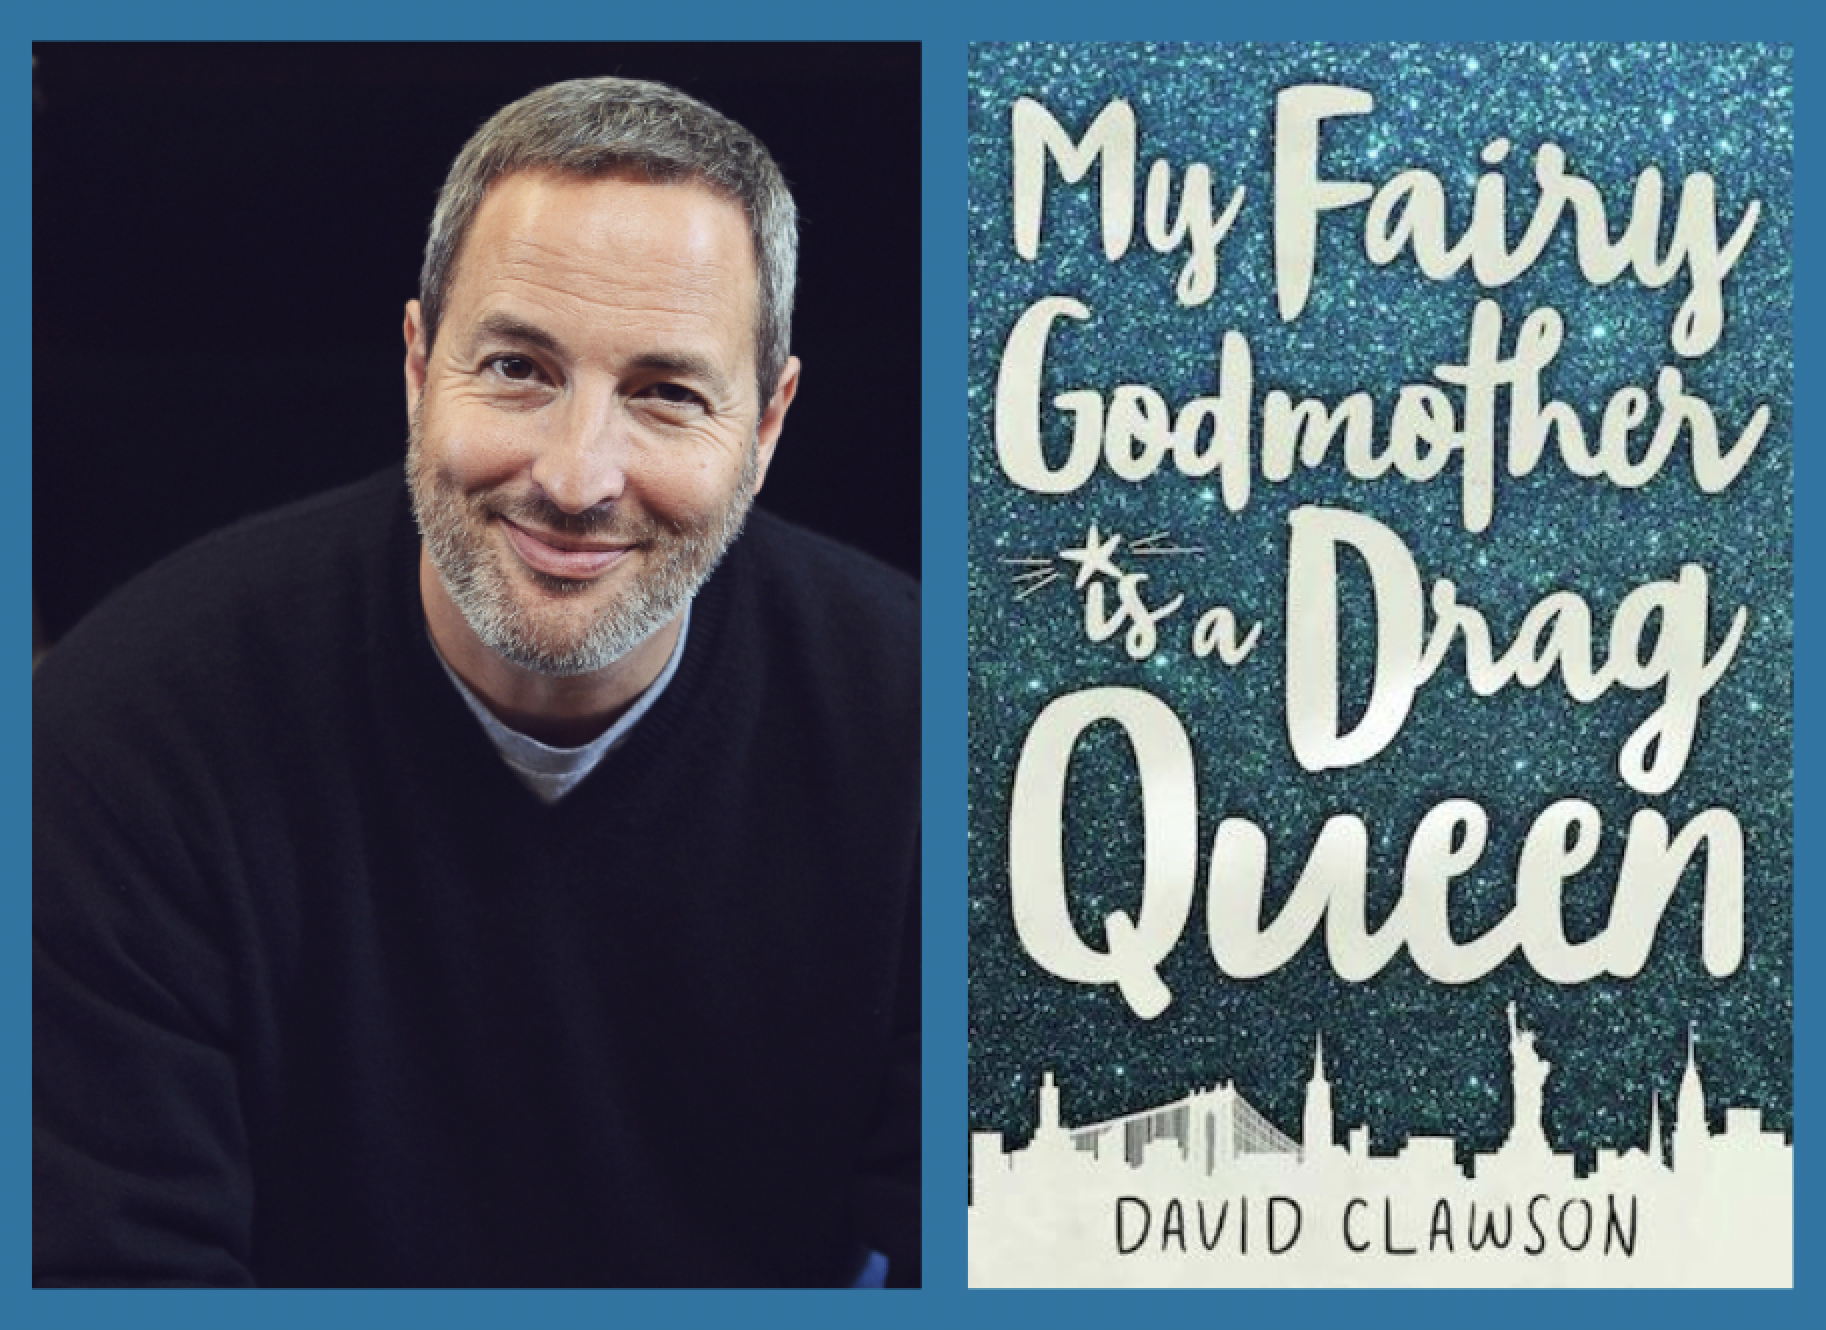 David Clawson, Author of "My Dairy Godmother is a Drag Queen"